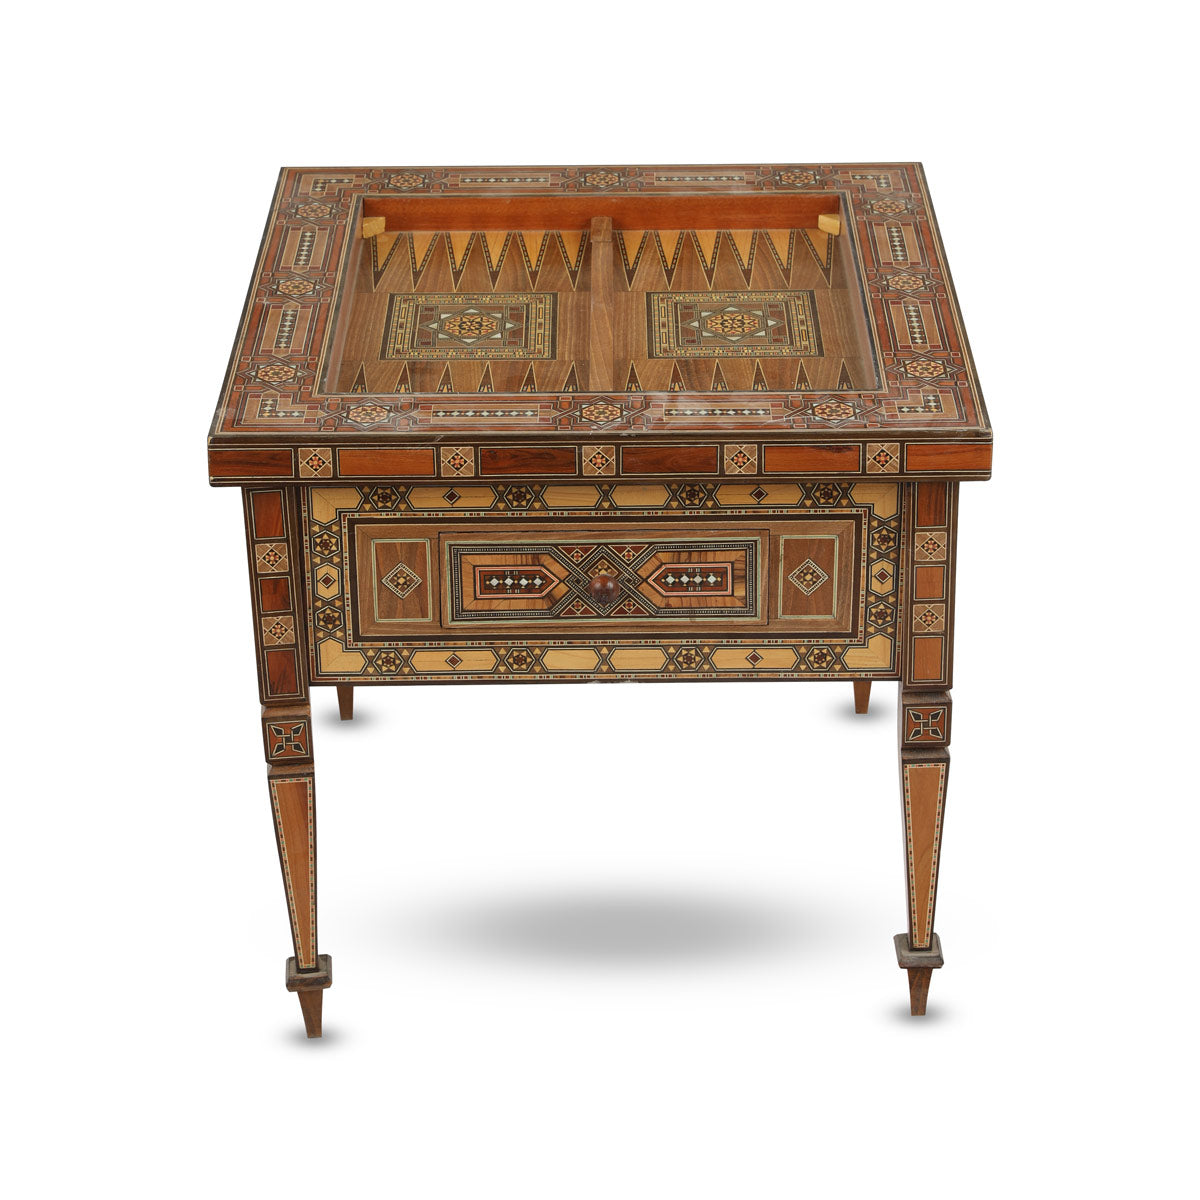 Angled Side View of Square Mosaic Gaming Table with Drawers Showcasing Backgammon Board